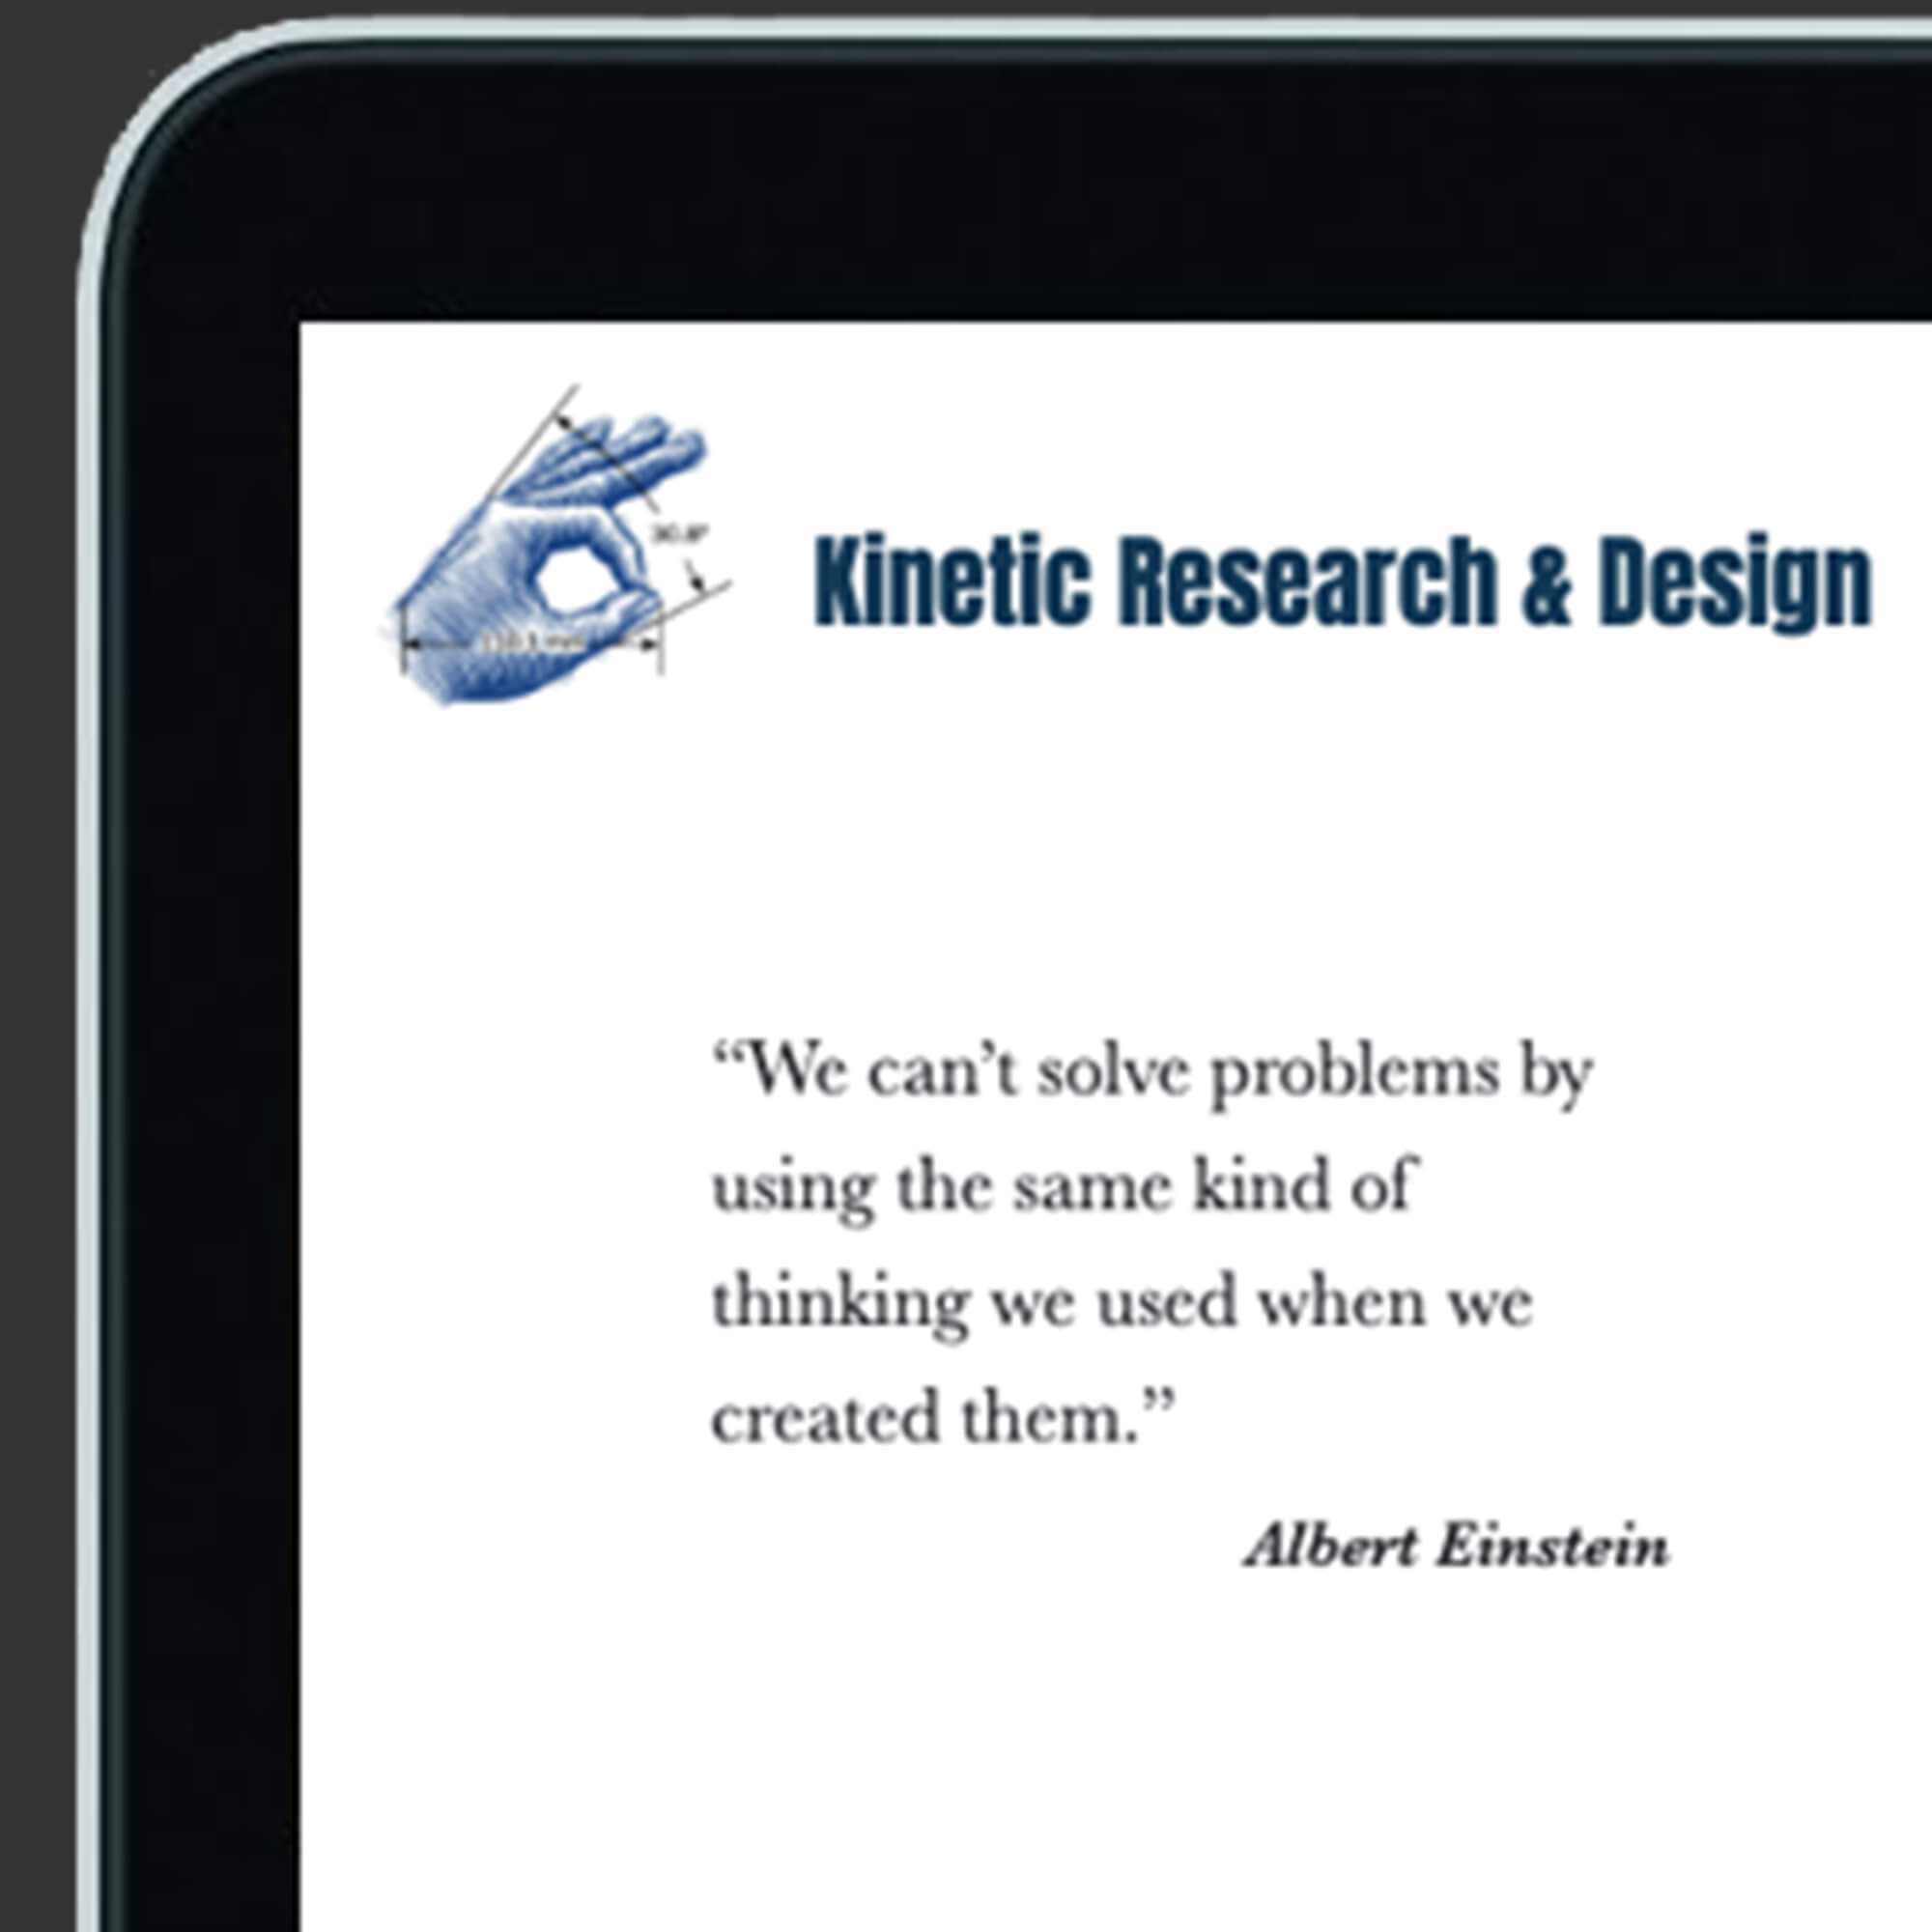 Kinetic Research and Design